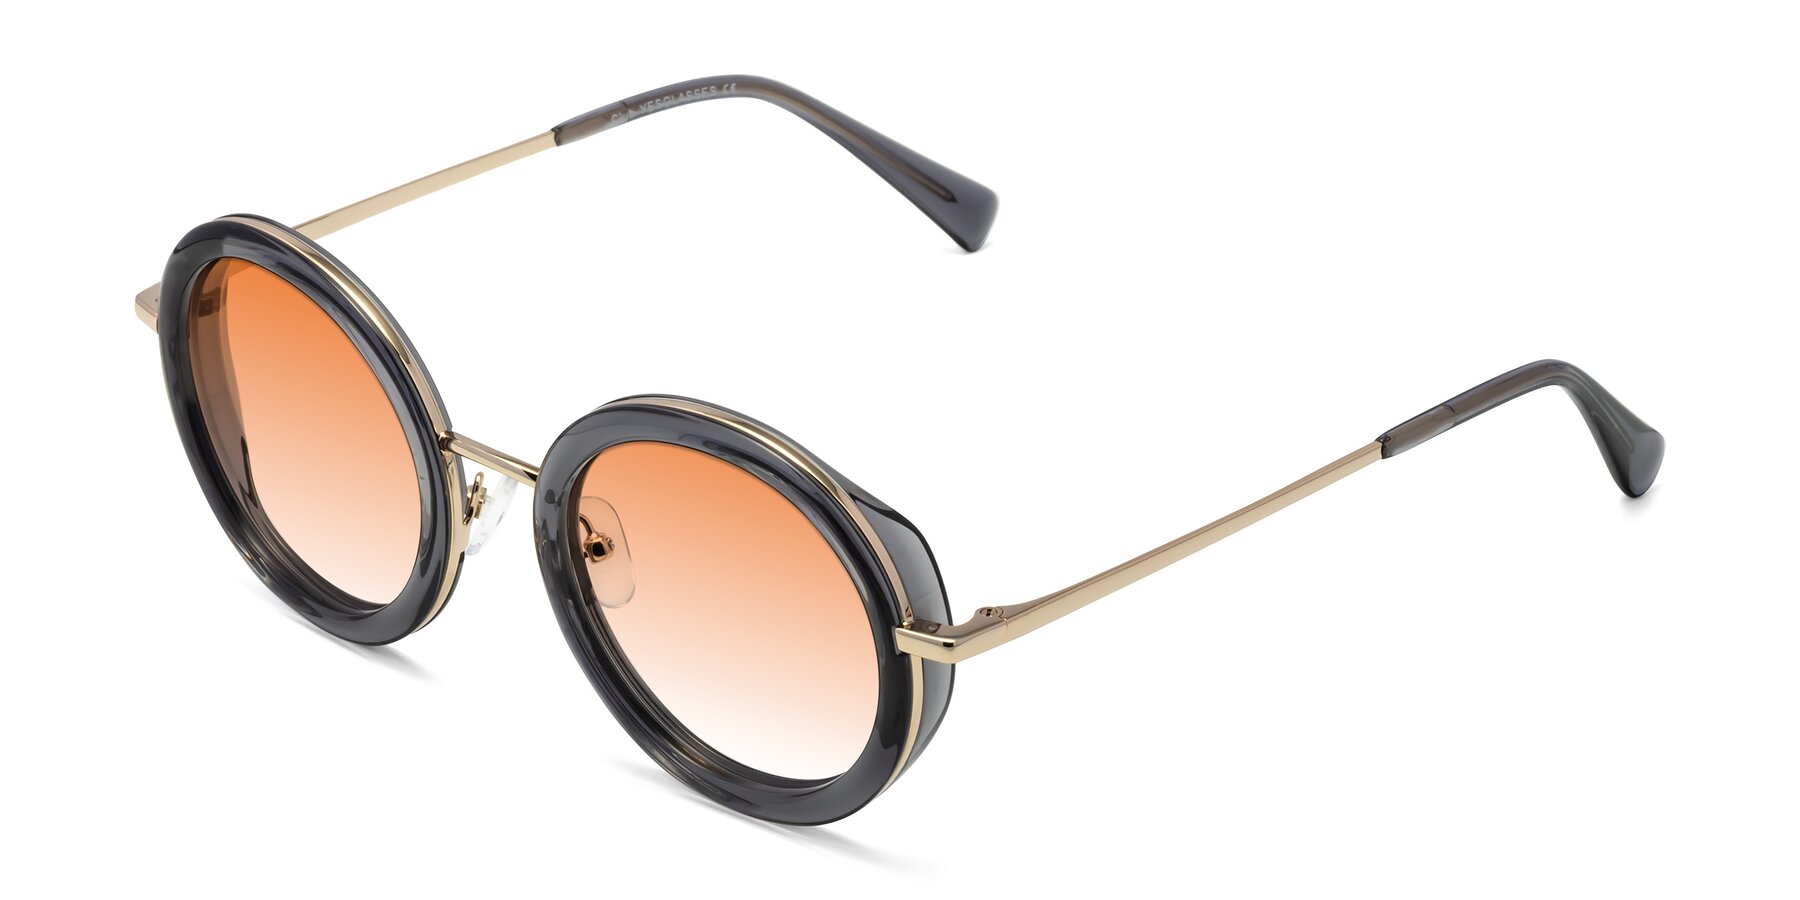 Angle of Club in Gray-Gold with Orange Gradient Lenses